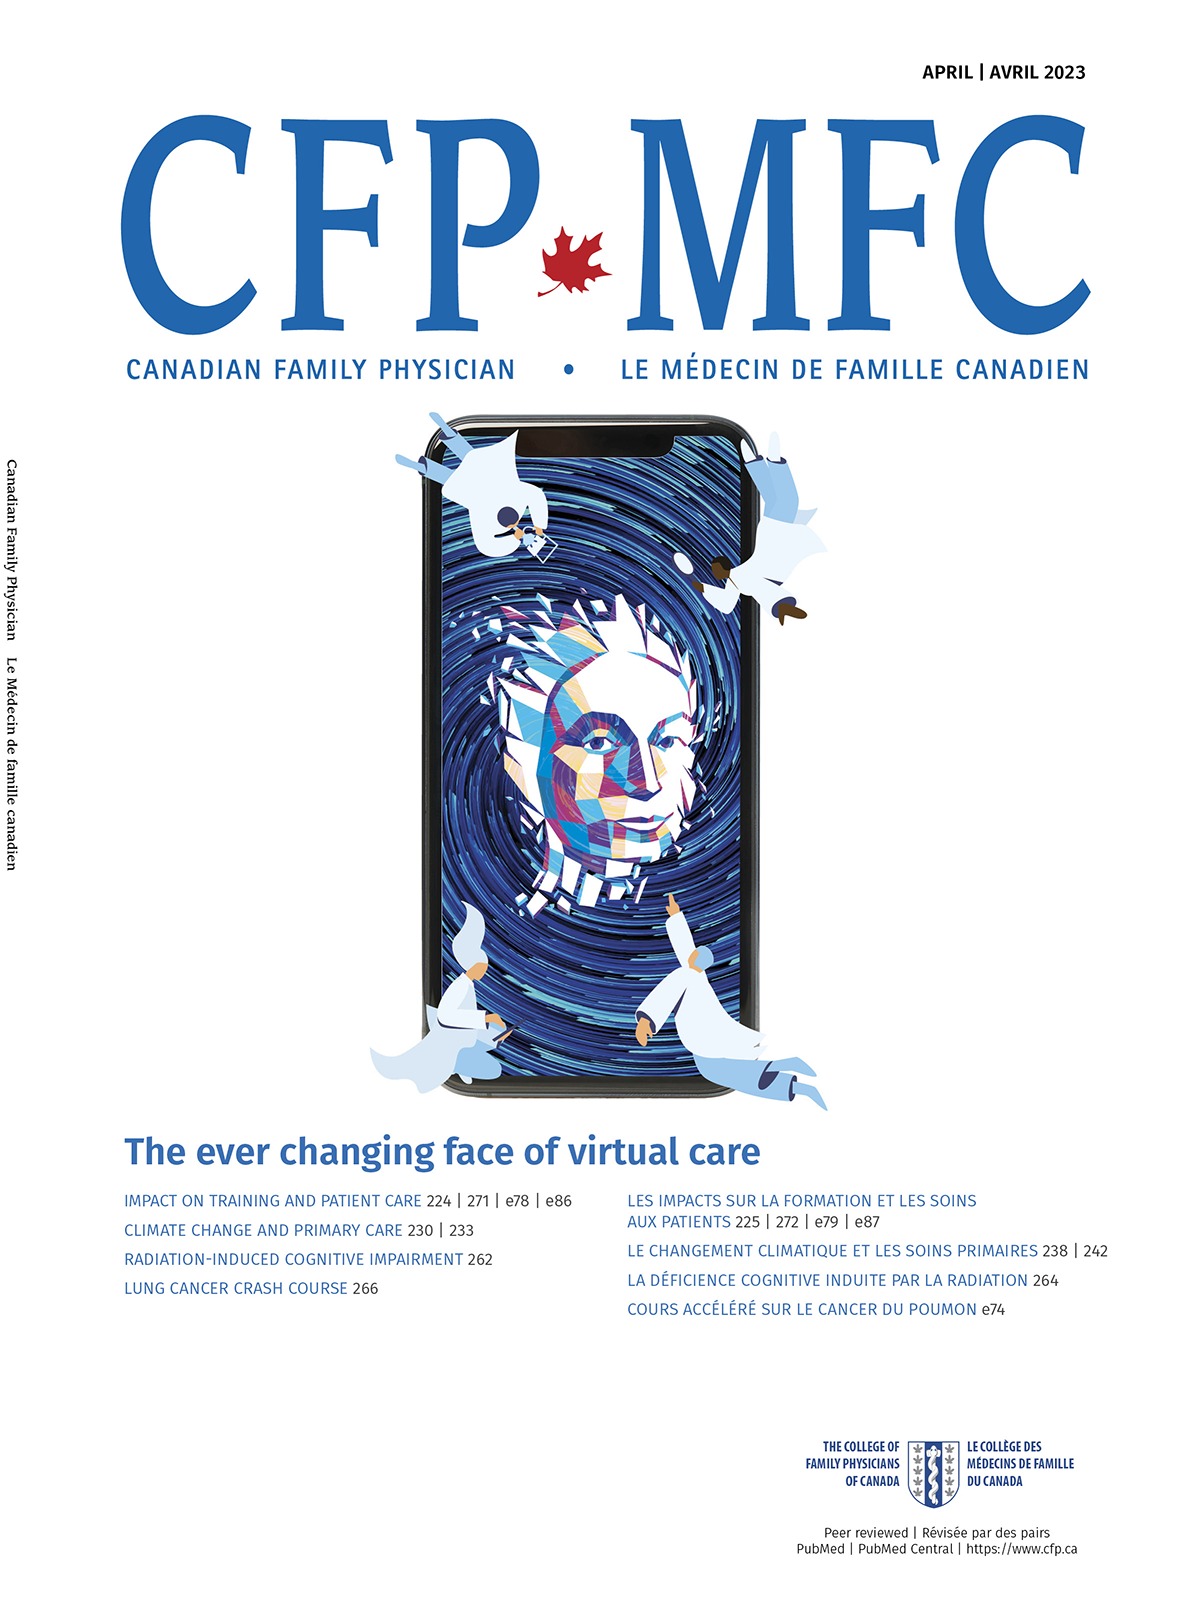 Impact of virtual visits on primary care physician work flows